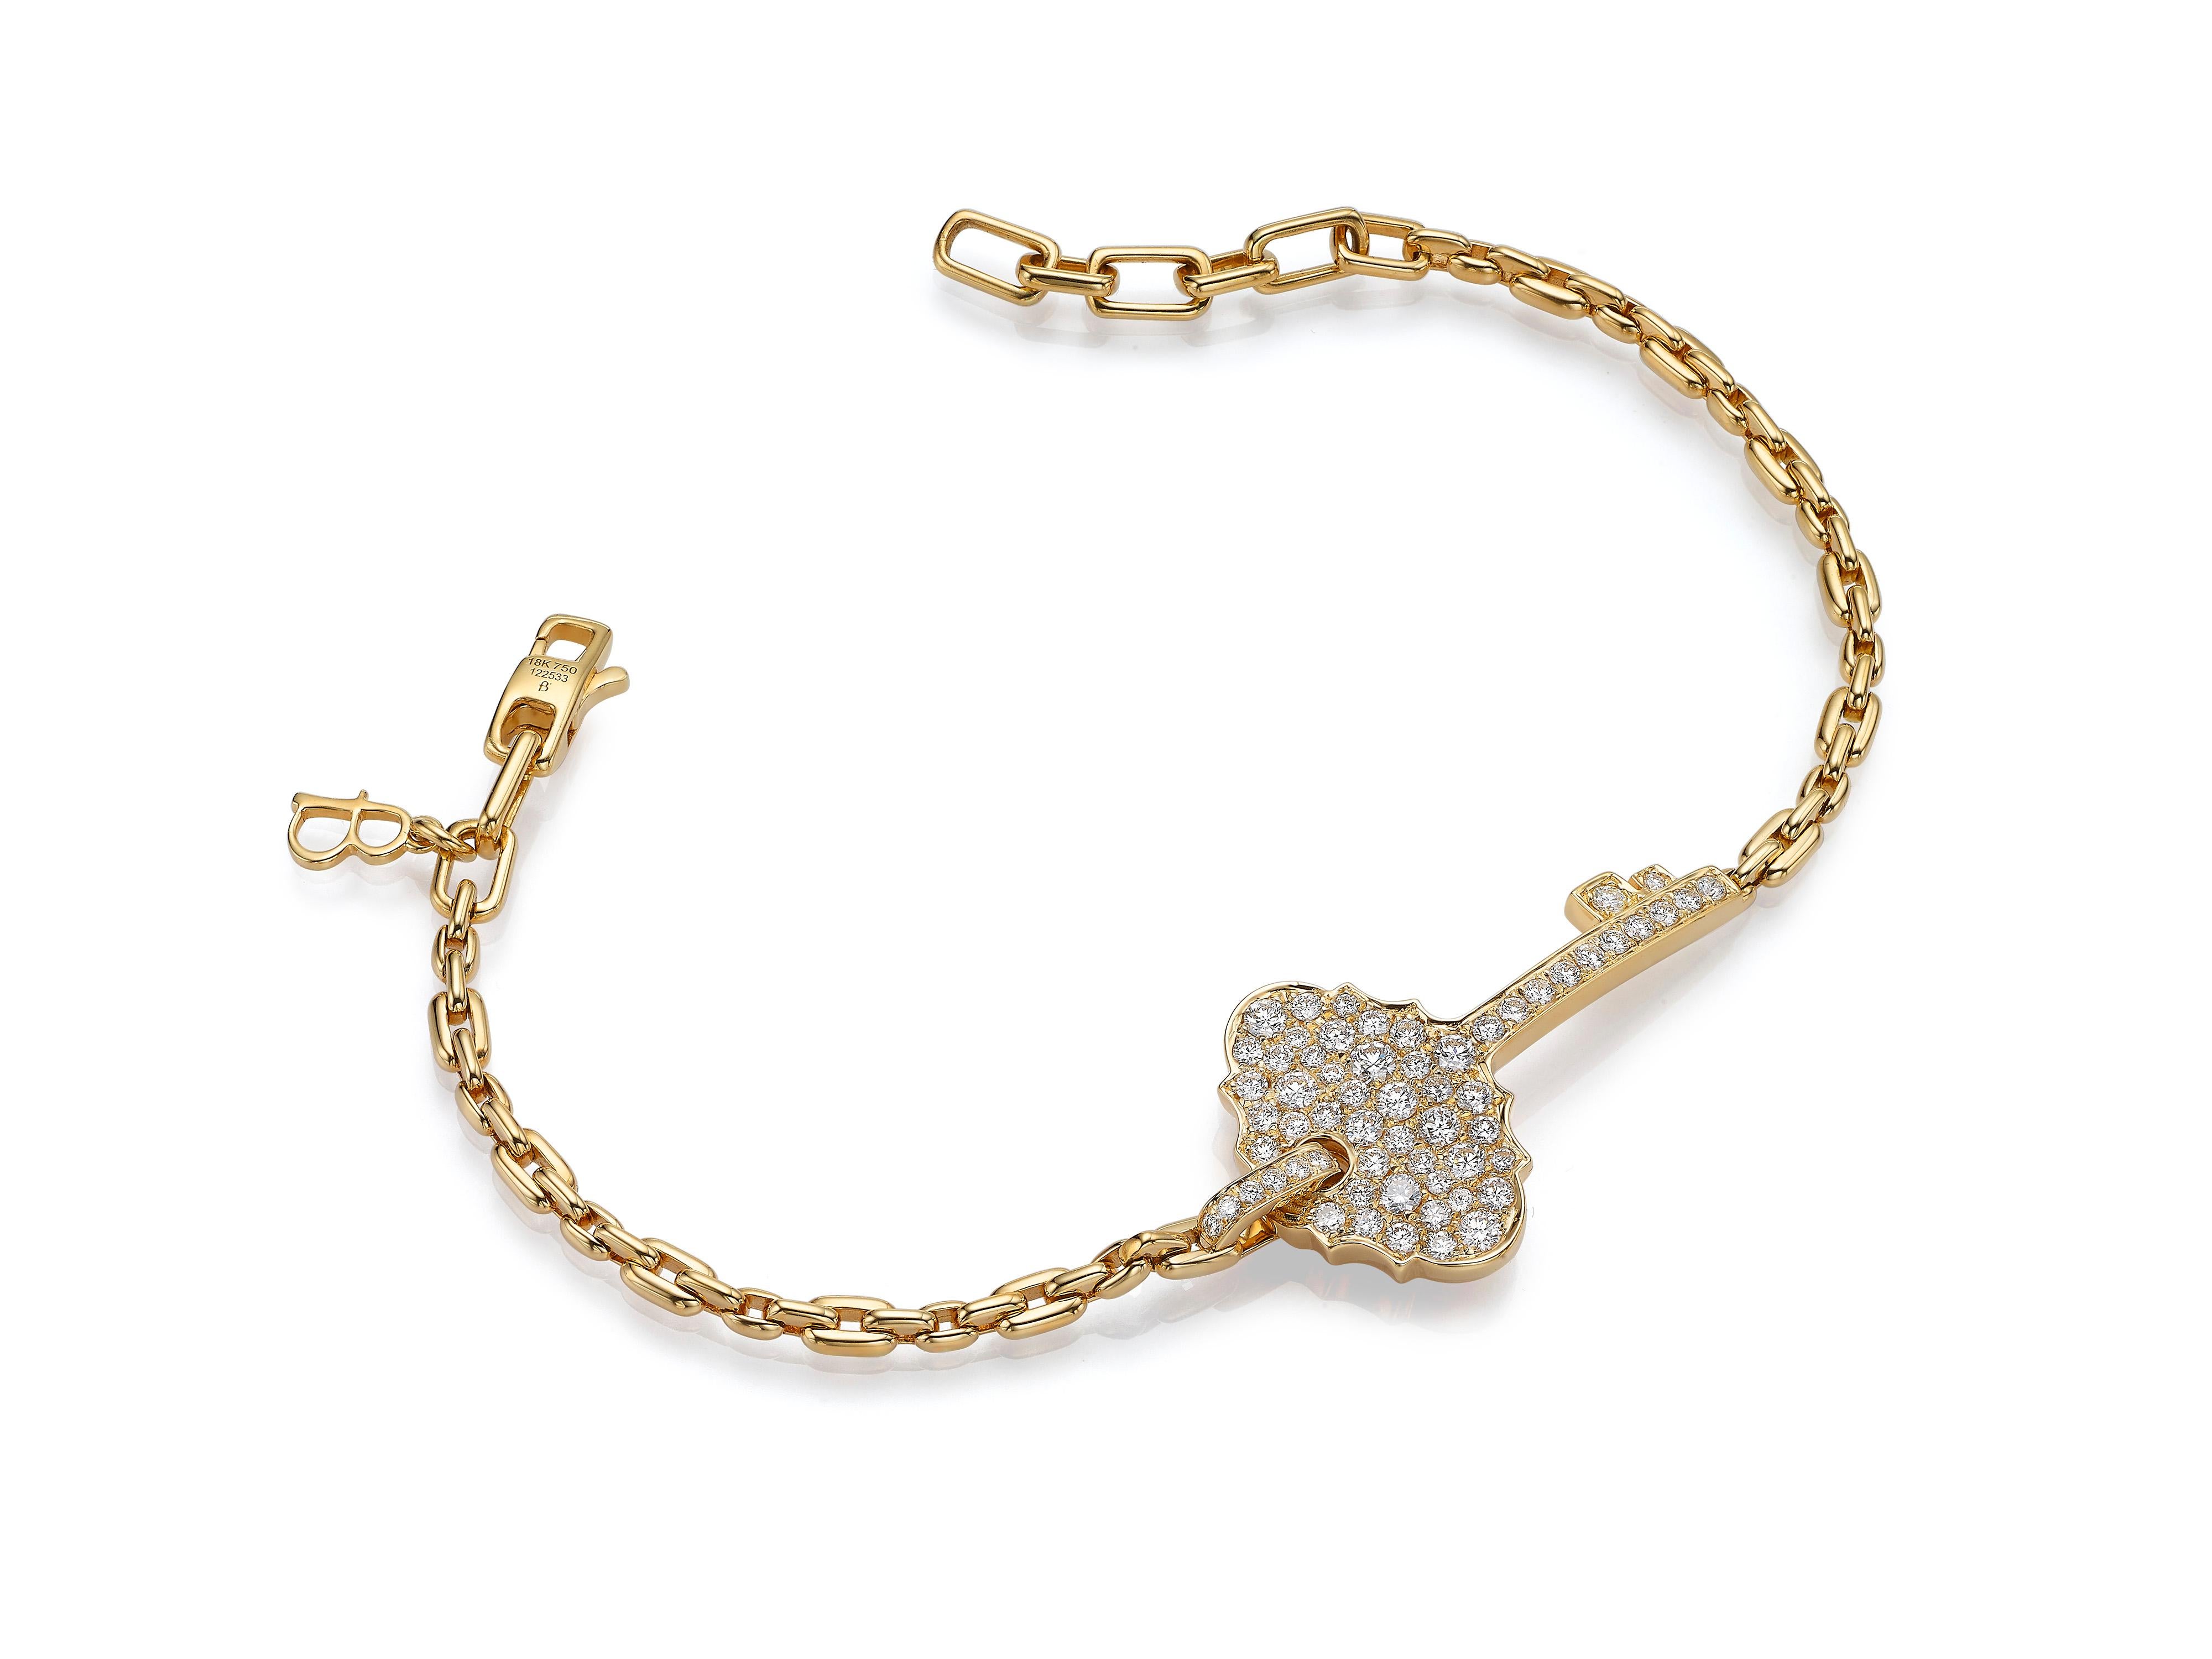 A simple, stackable bracelet that is perfect for every day.  Butani’s 18K yellow gold bracelet is strung with a key pendant and encrusted with diamonds totaling 0.88 carats.  Adjustable to your preferred length.  Also available in rose gold and